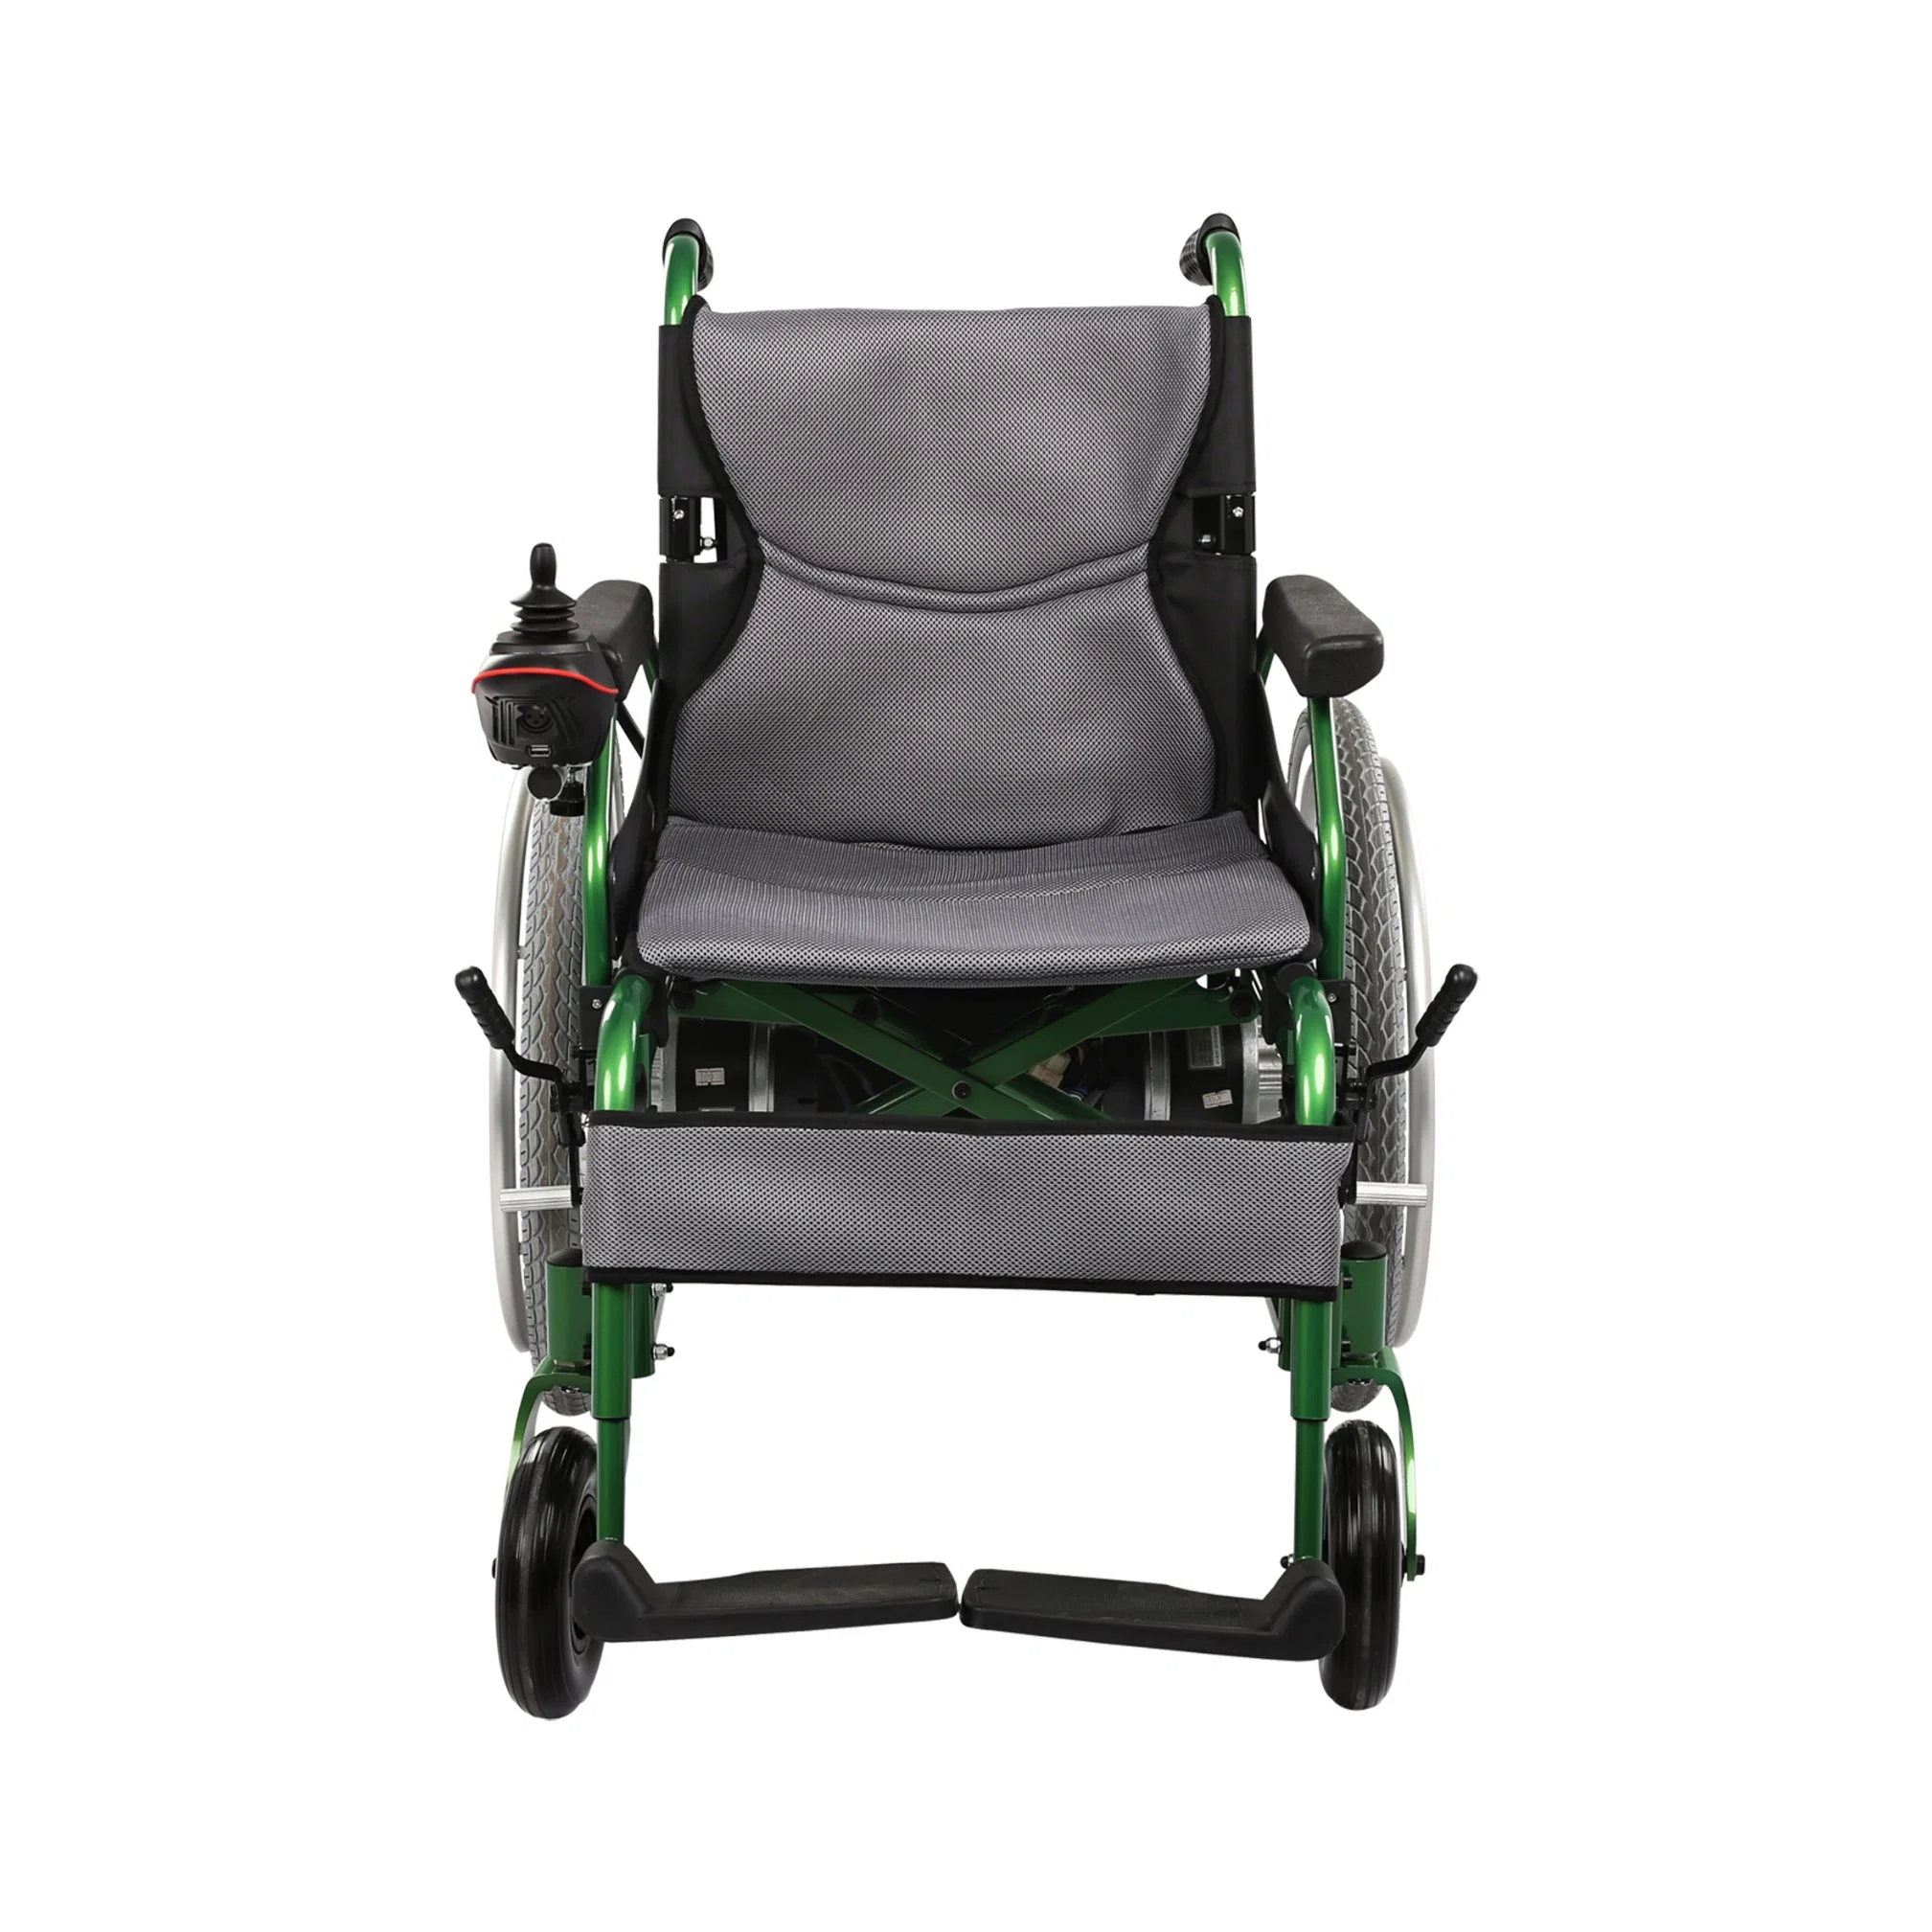 Electric Transfer Wheelchair Manual Wheelchair Smart Wheelchair with Powerful Motors